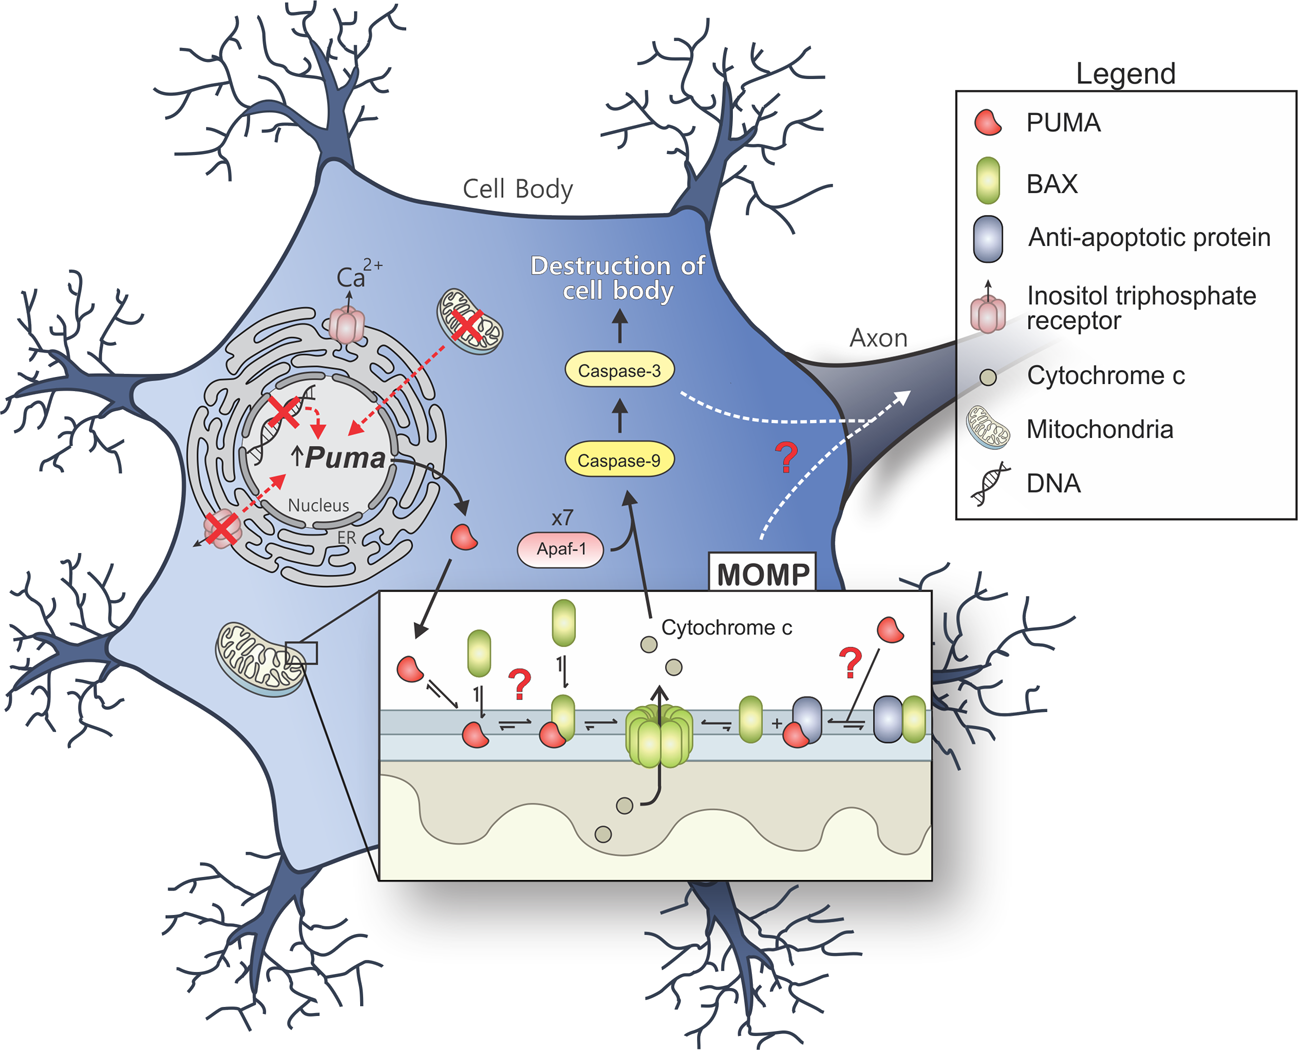 Neuronal cell life, death, and axonal degeneration as regulated by the  BCL-2 family proteins | Cell Death & Differentiation